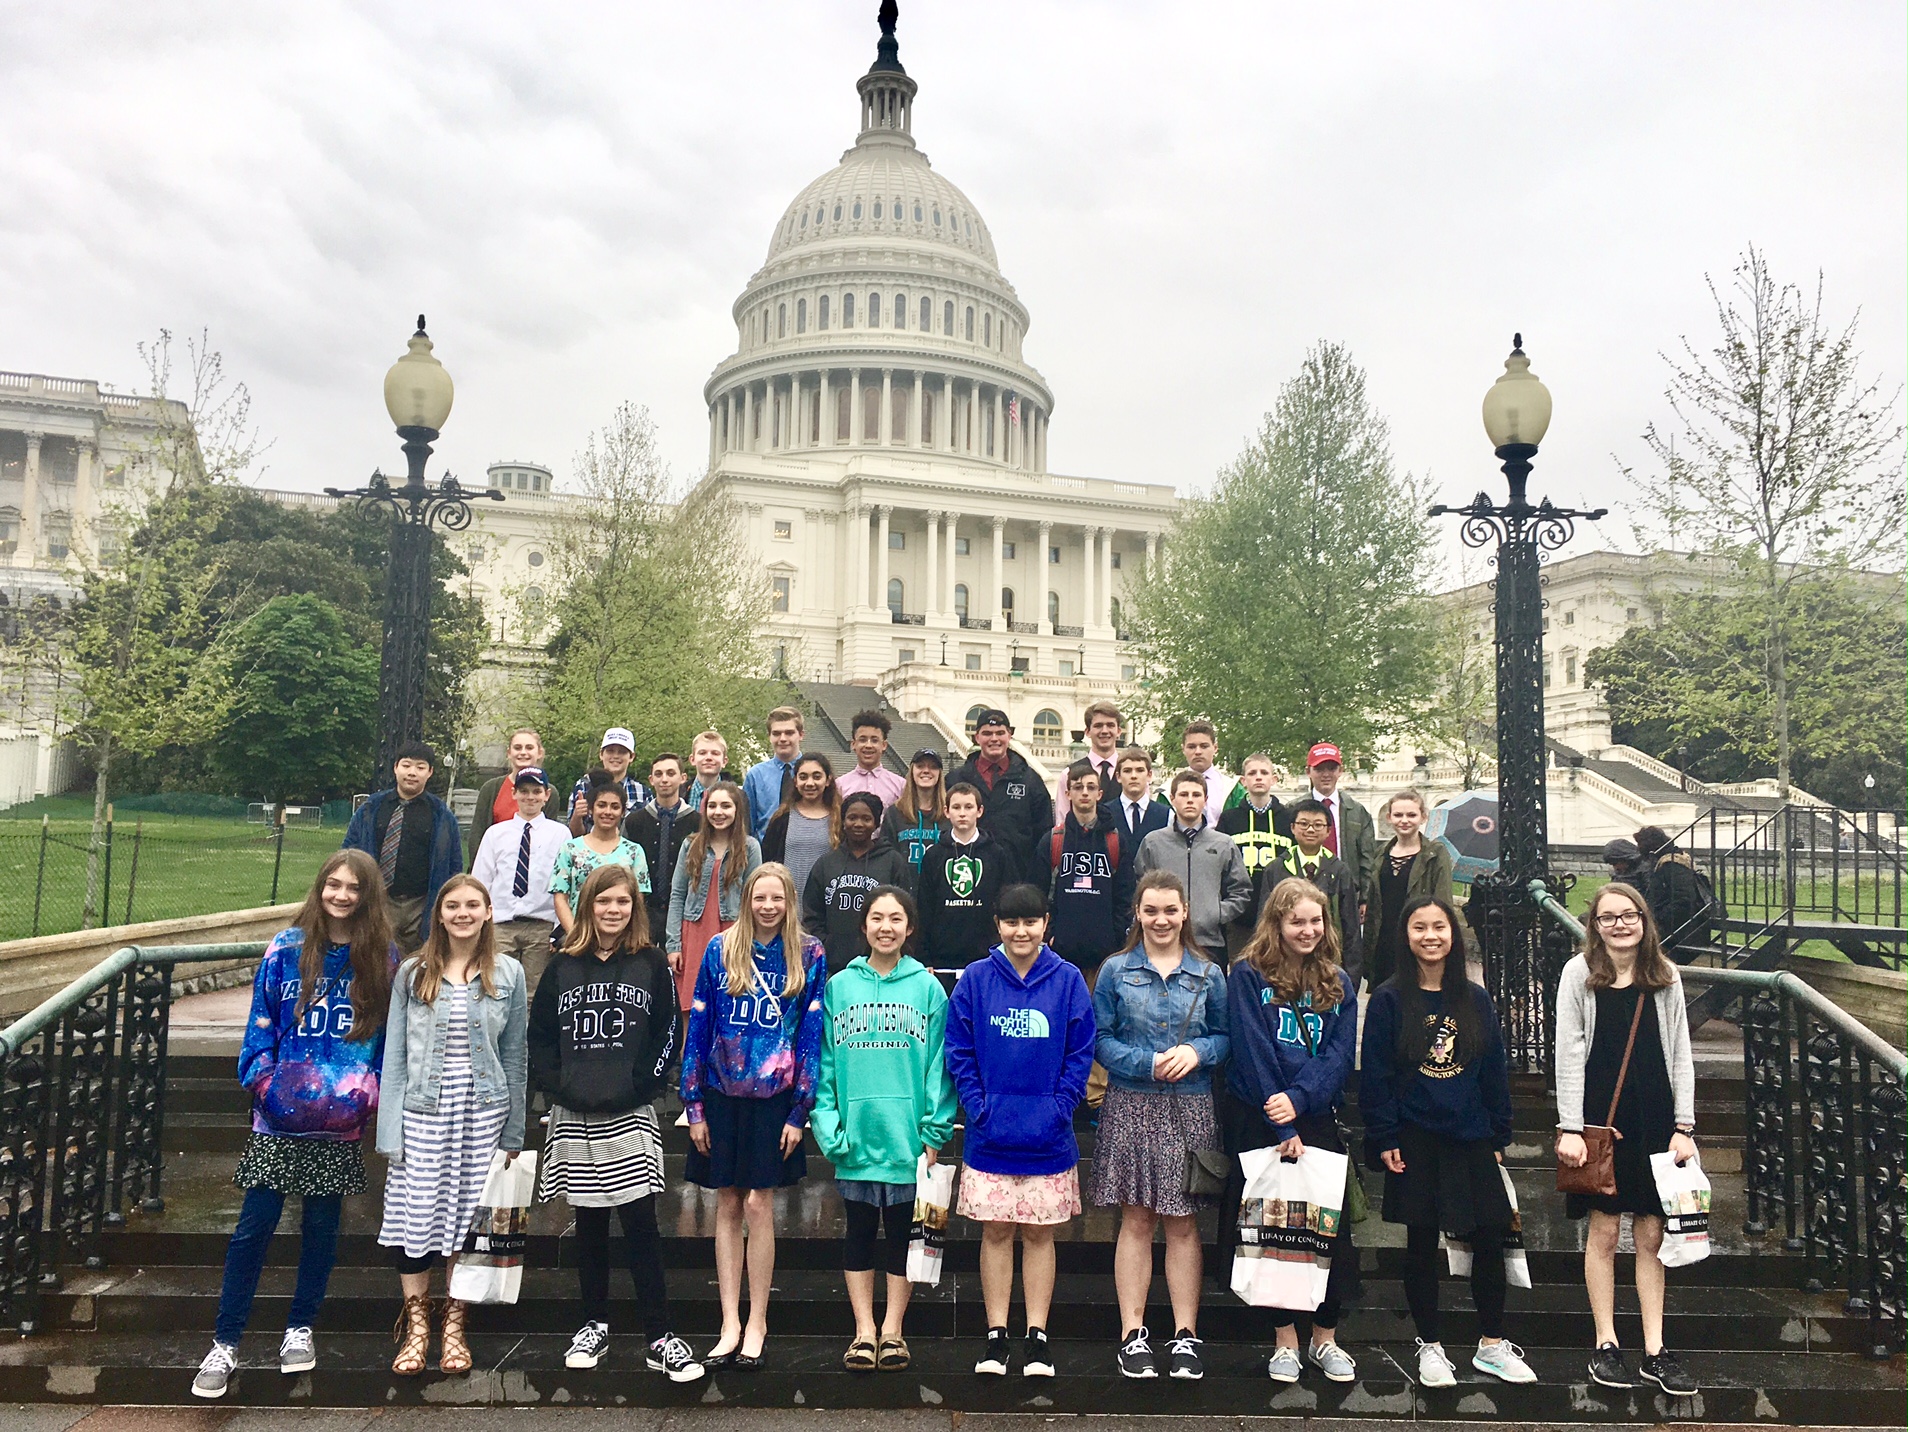 Group of middle school students posing in front of the US capitol building